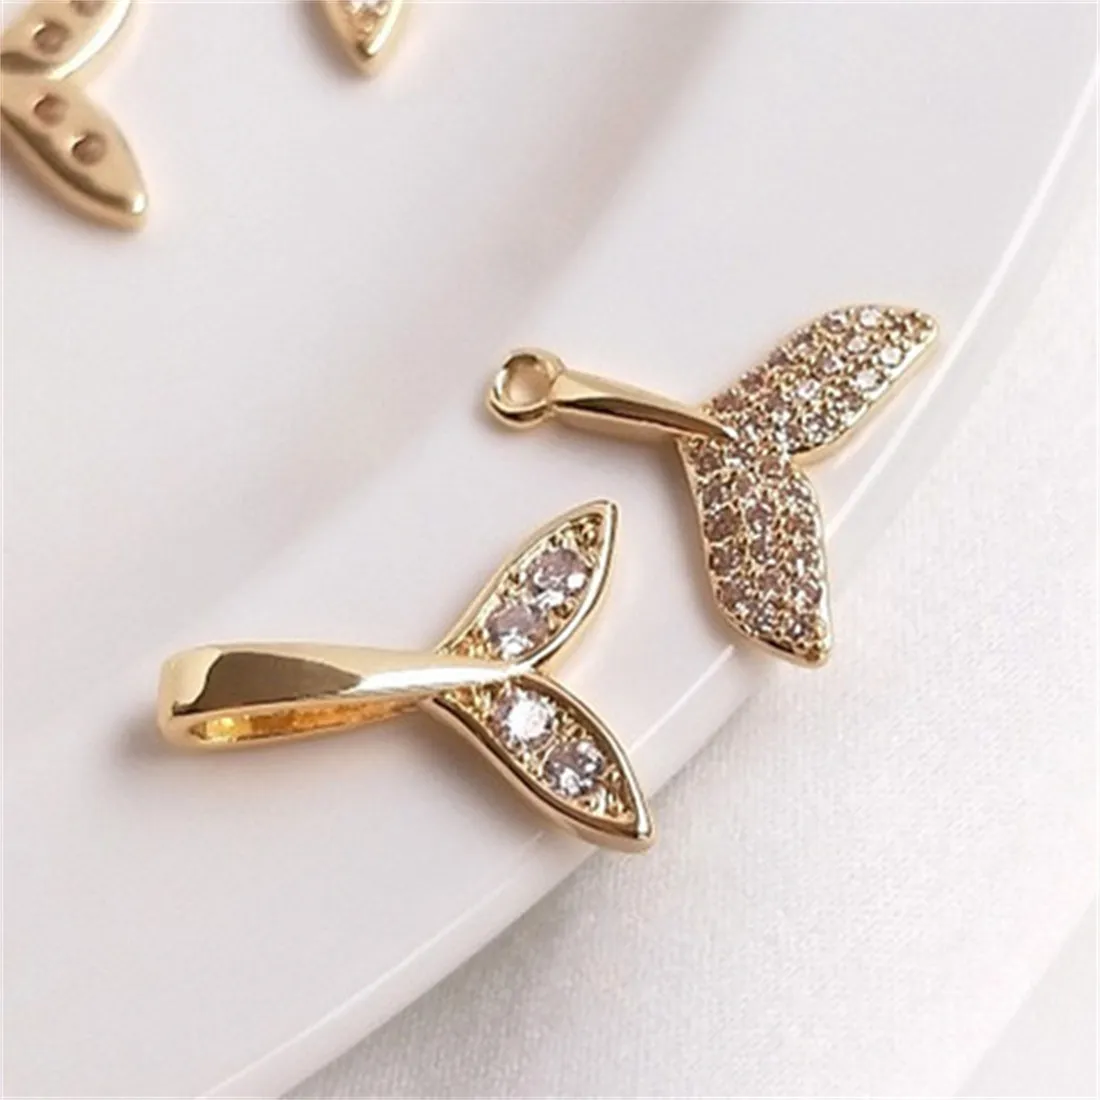 14K Gold Filled Micro Inlaid Zircon Mermaid Whale Tail Pendant Handmade DIY Jewelry Charm Pendant E016 50pcs mermaid tail opp bags for jewelry display handmade food self adhesive bags cookies packaging bags candy self sealing bags